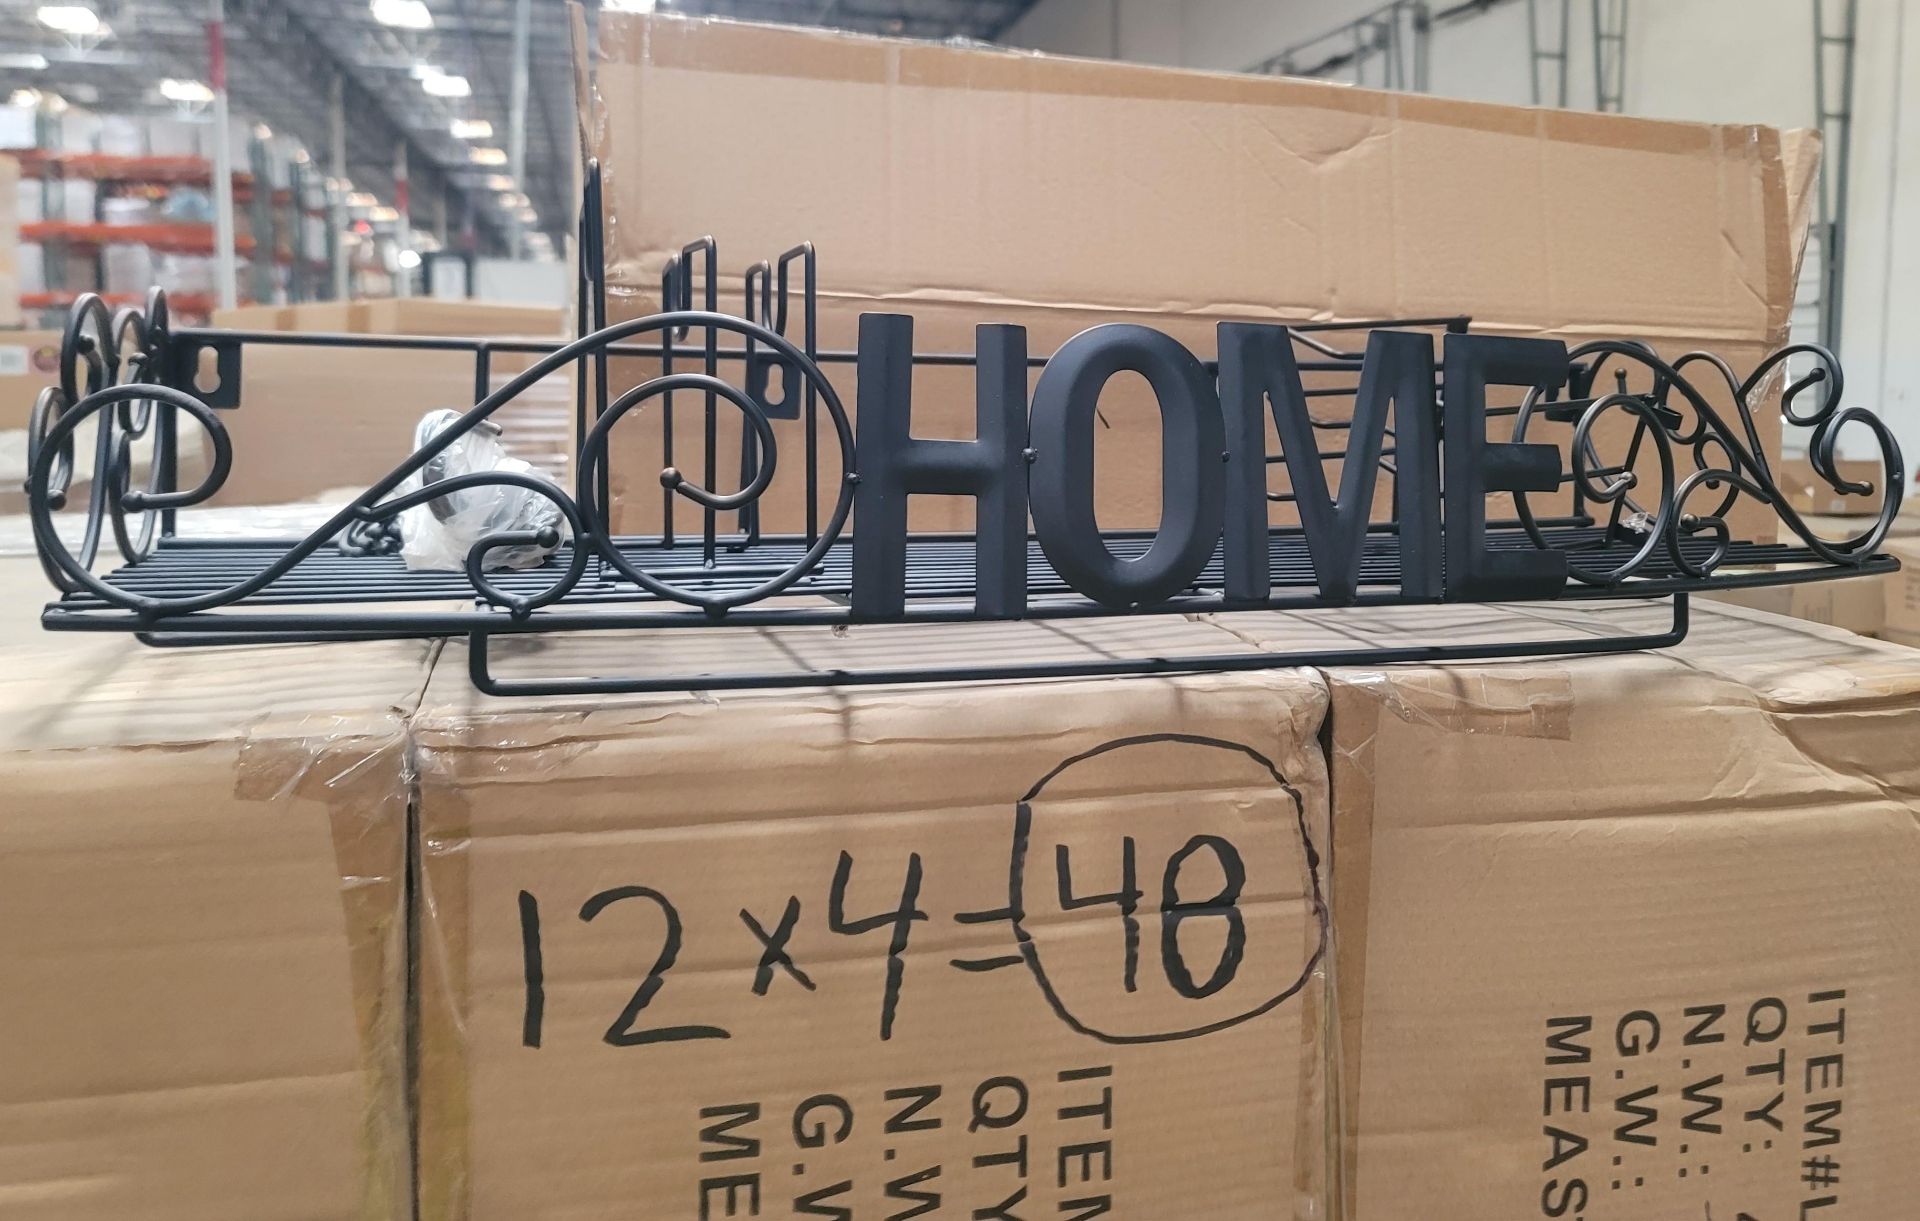 LOT - PALLET OF (48) "HOME" HANGING WALL SHELF, (12 CASES/4 PER CASE)